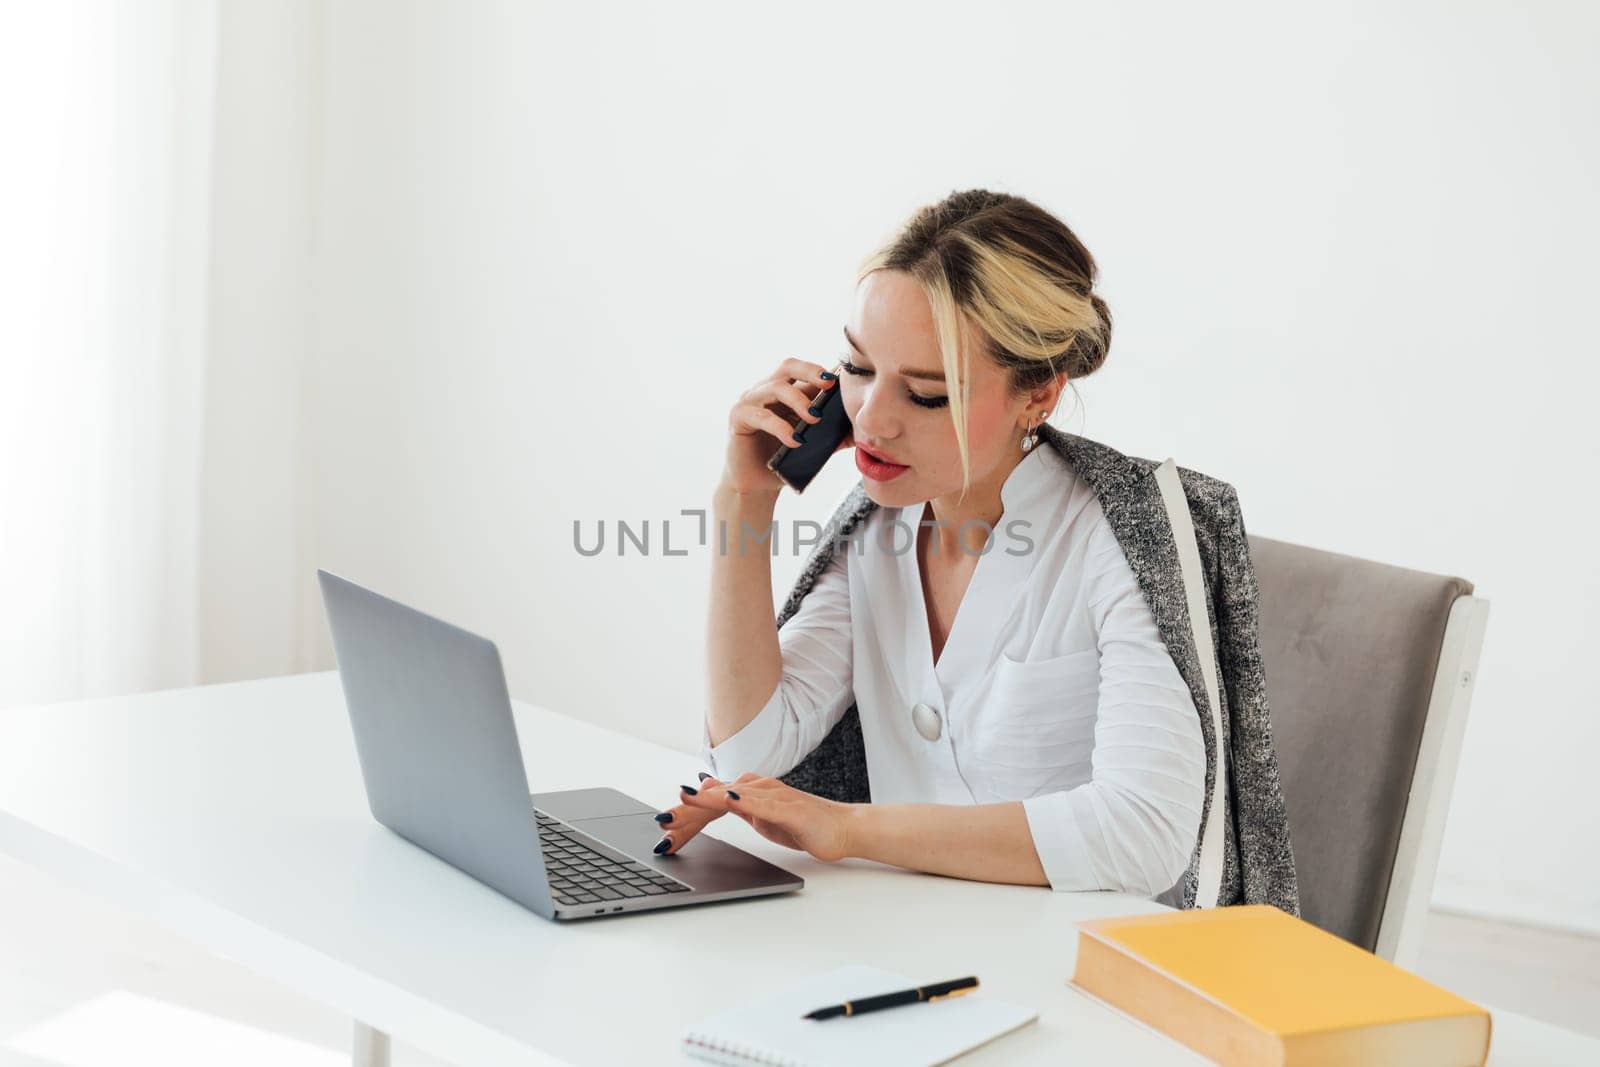 Business woman in office working on laptop talking on phone by Simakov